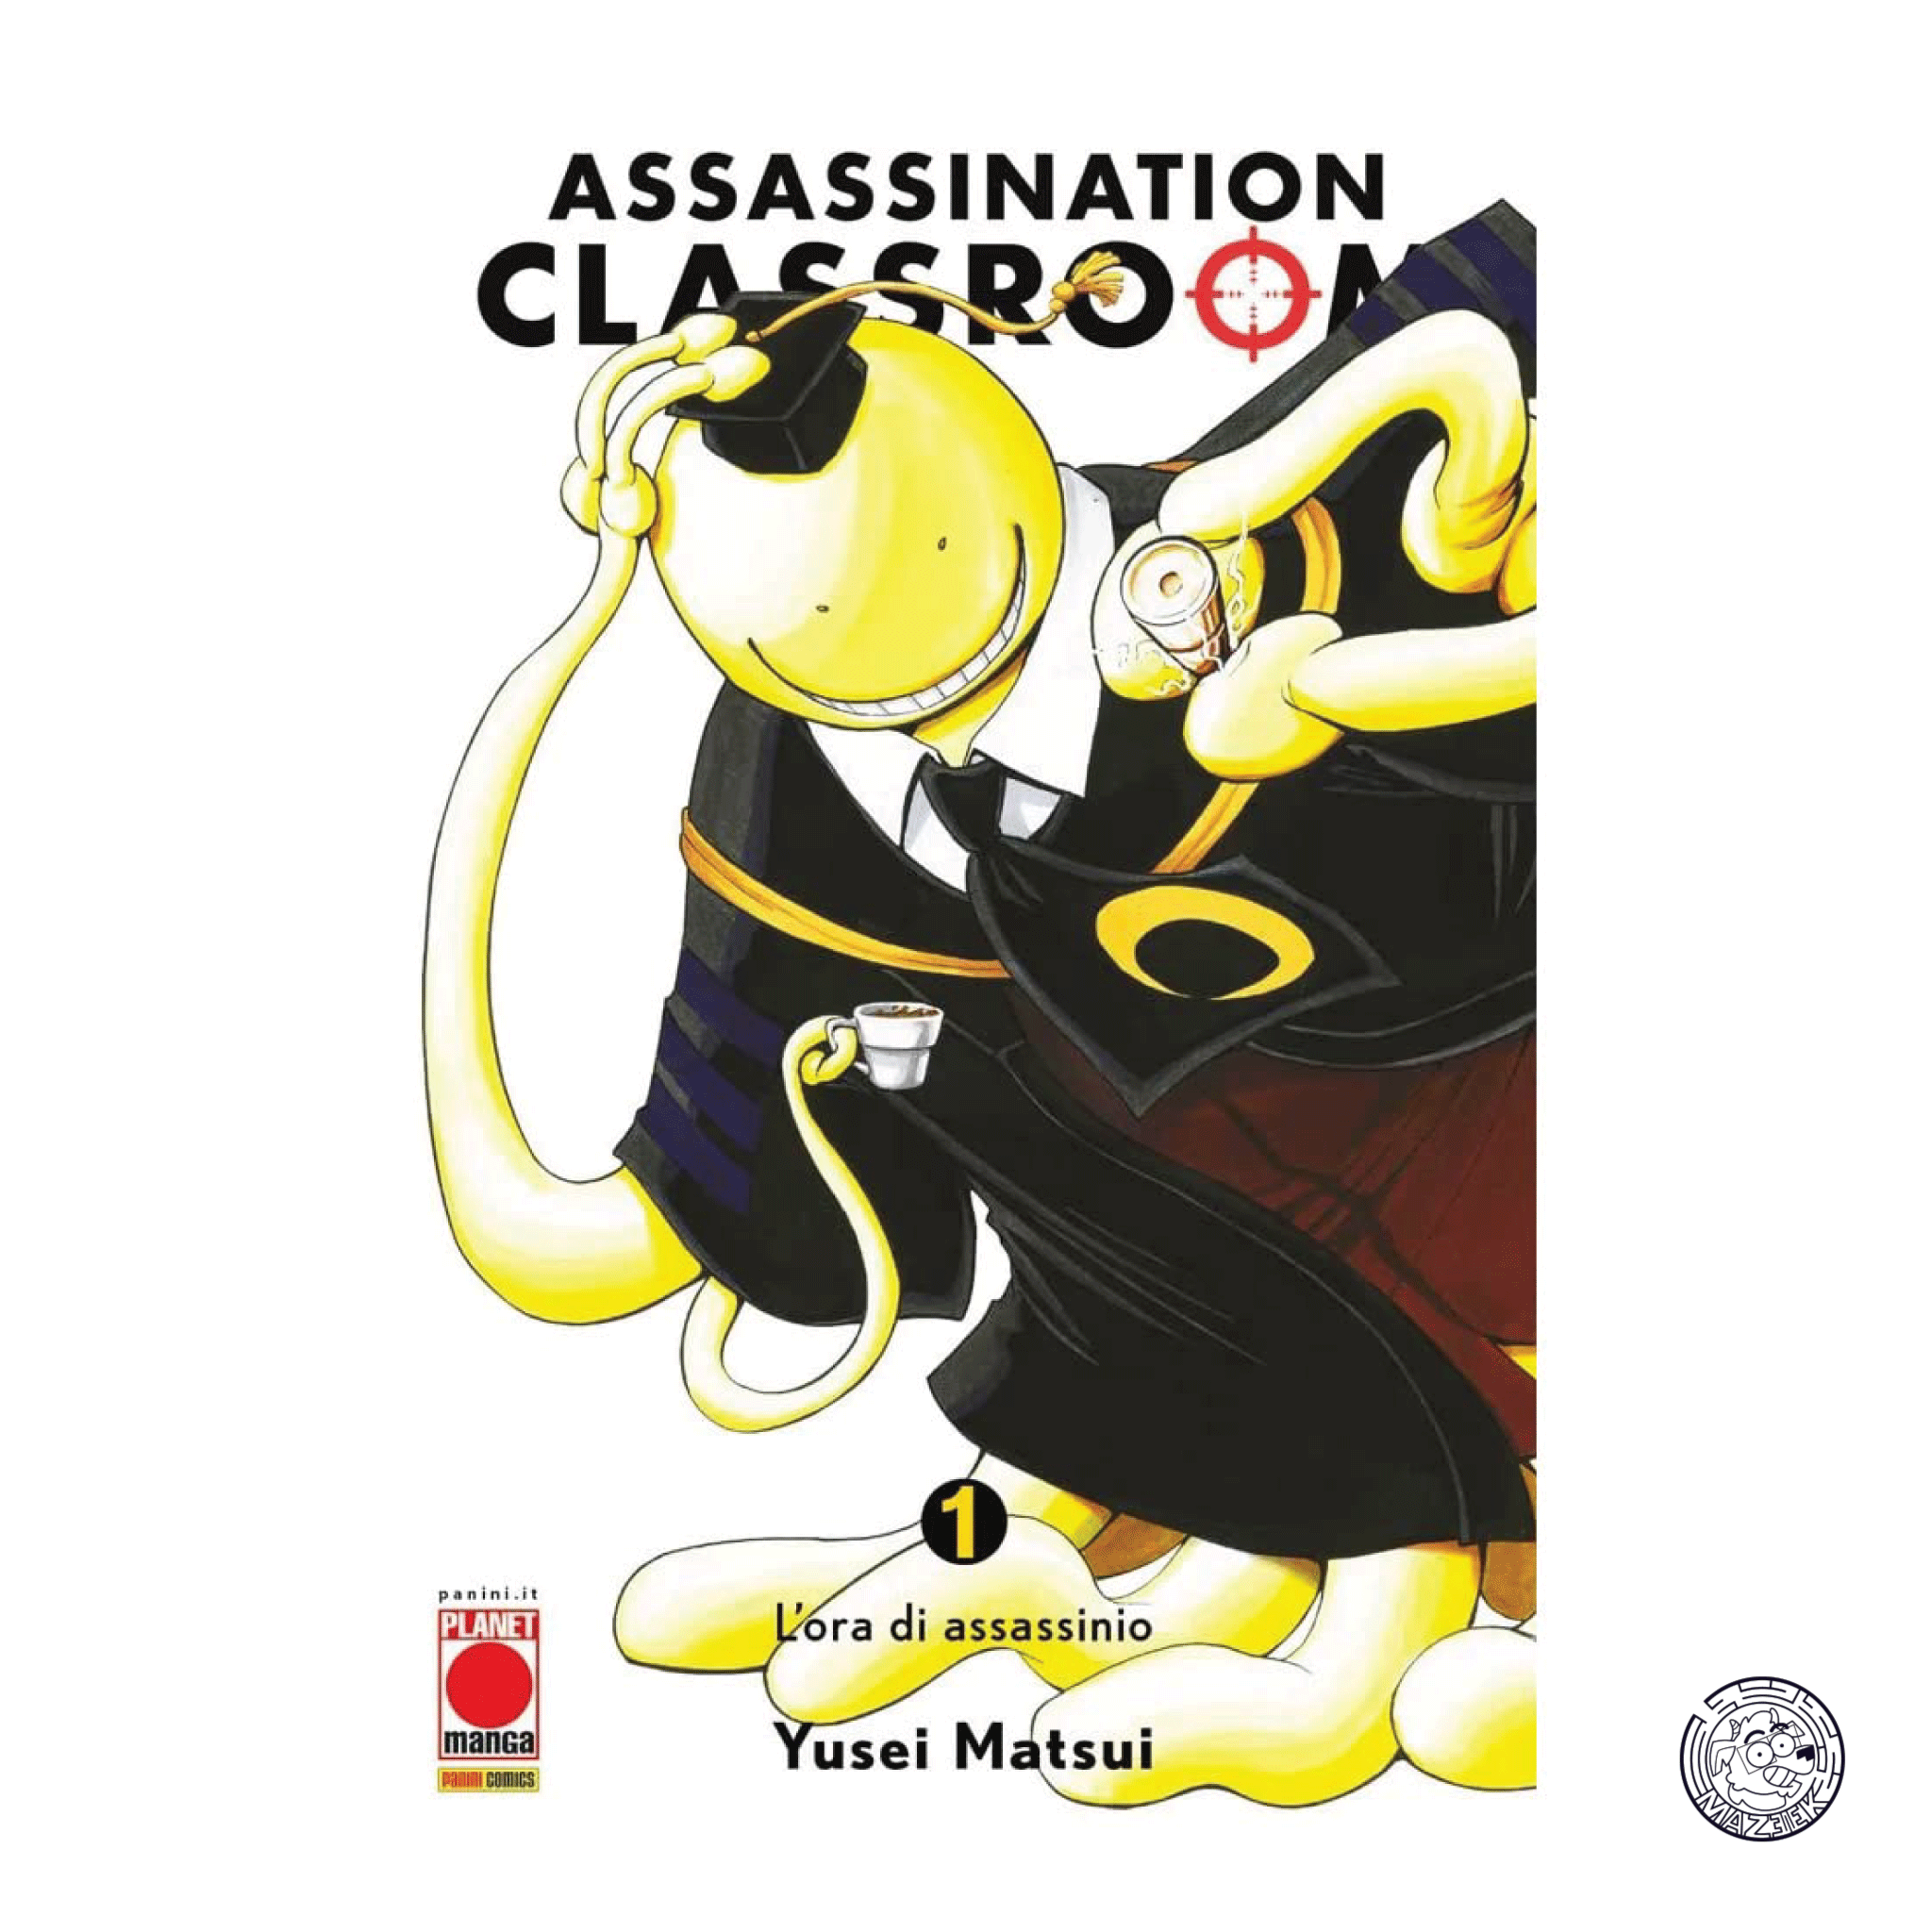 Assassination Classroom 01 Variant with BOX